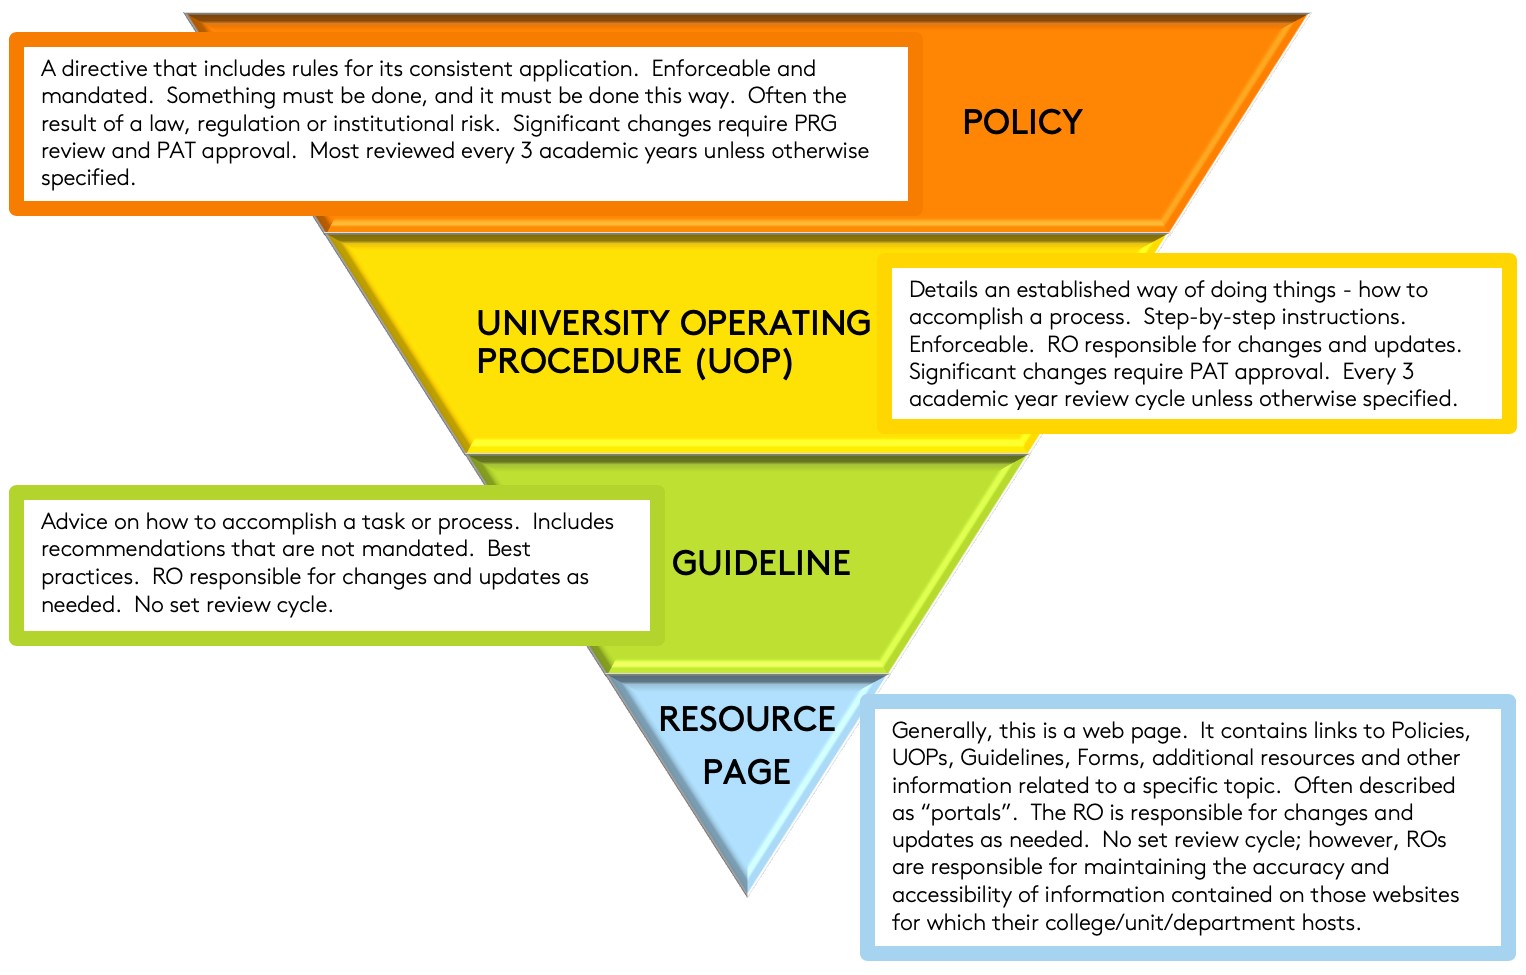 Description of four document types: Policy, UOP, Guidelines, and Resource Webpage